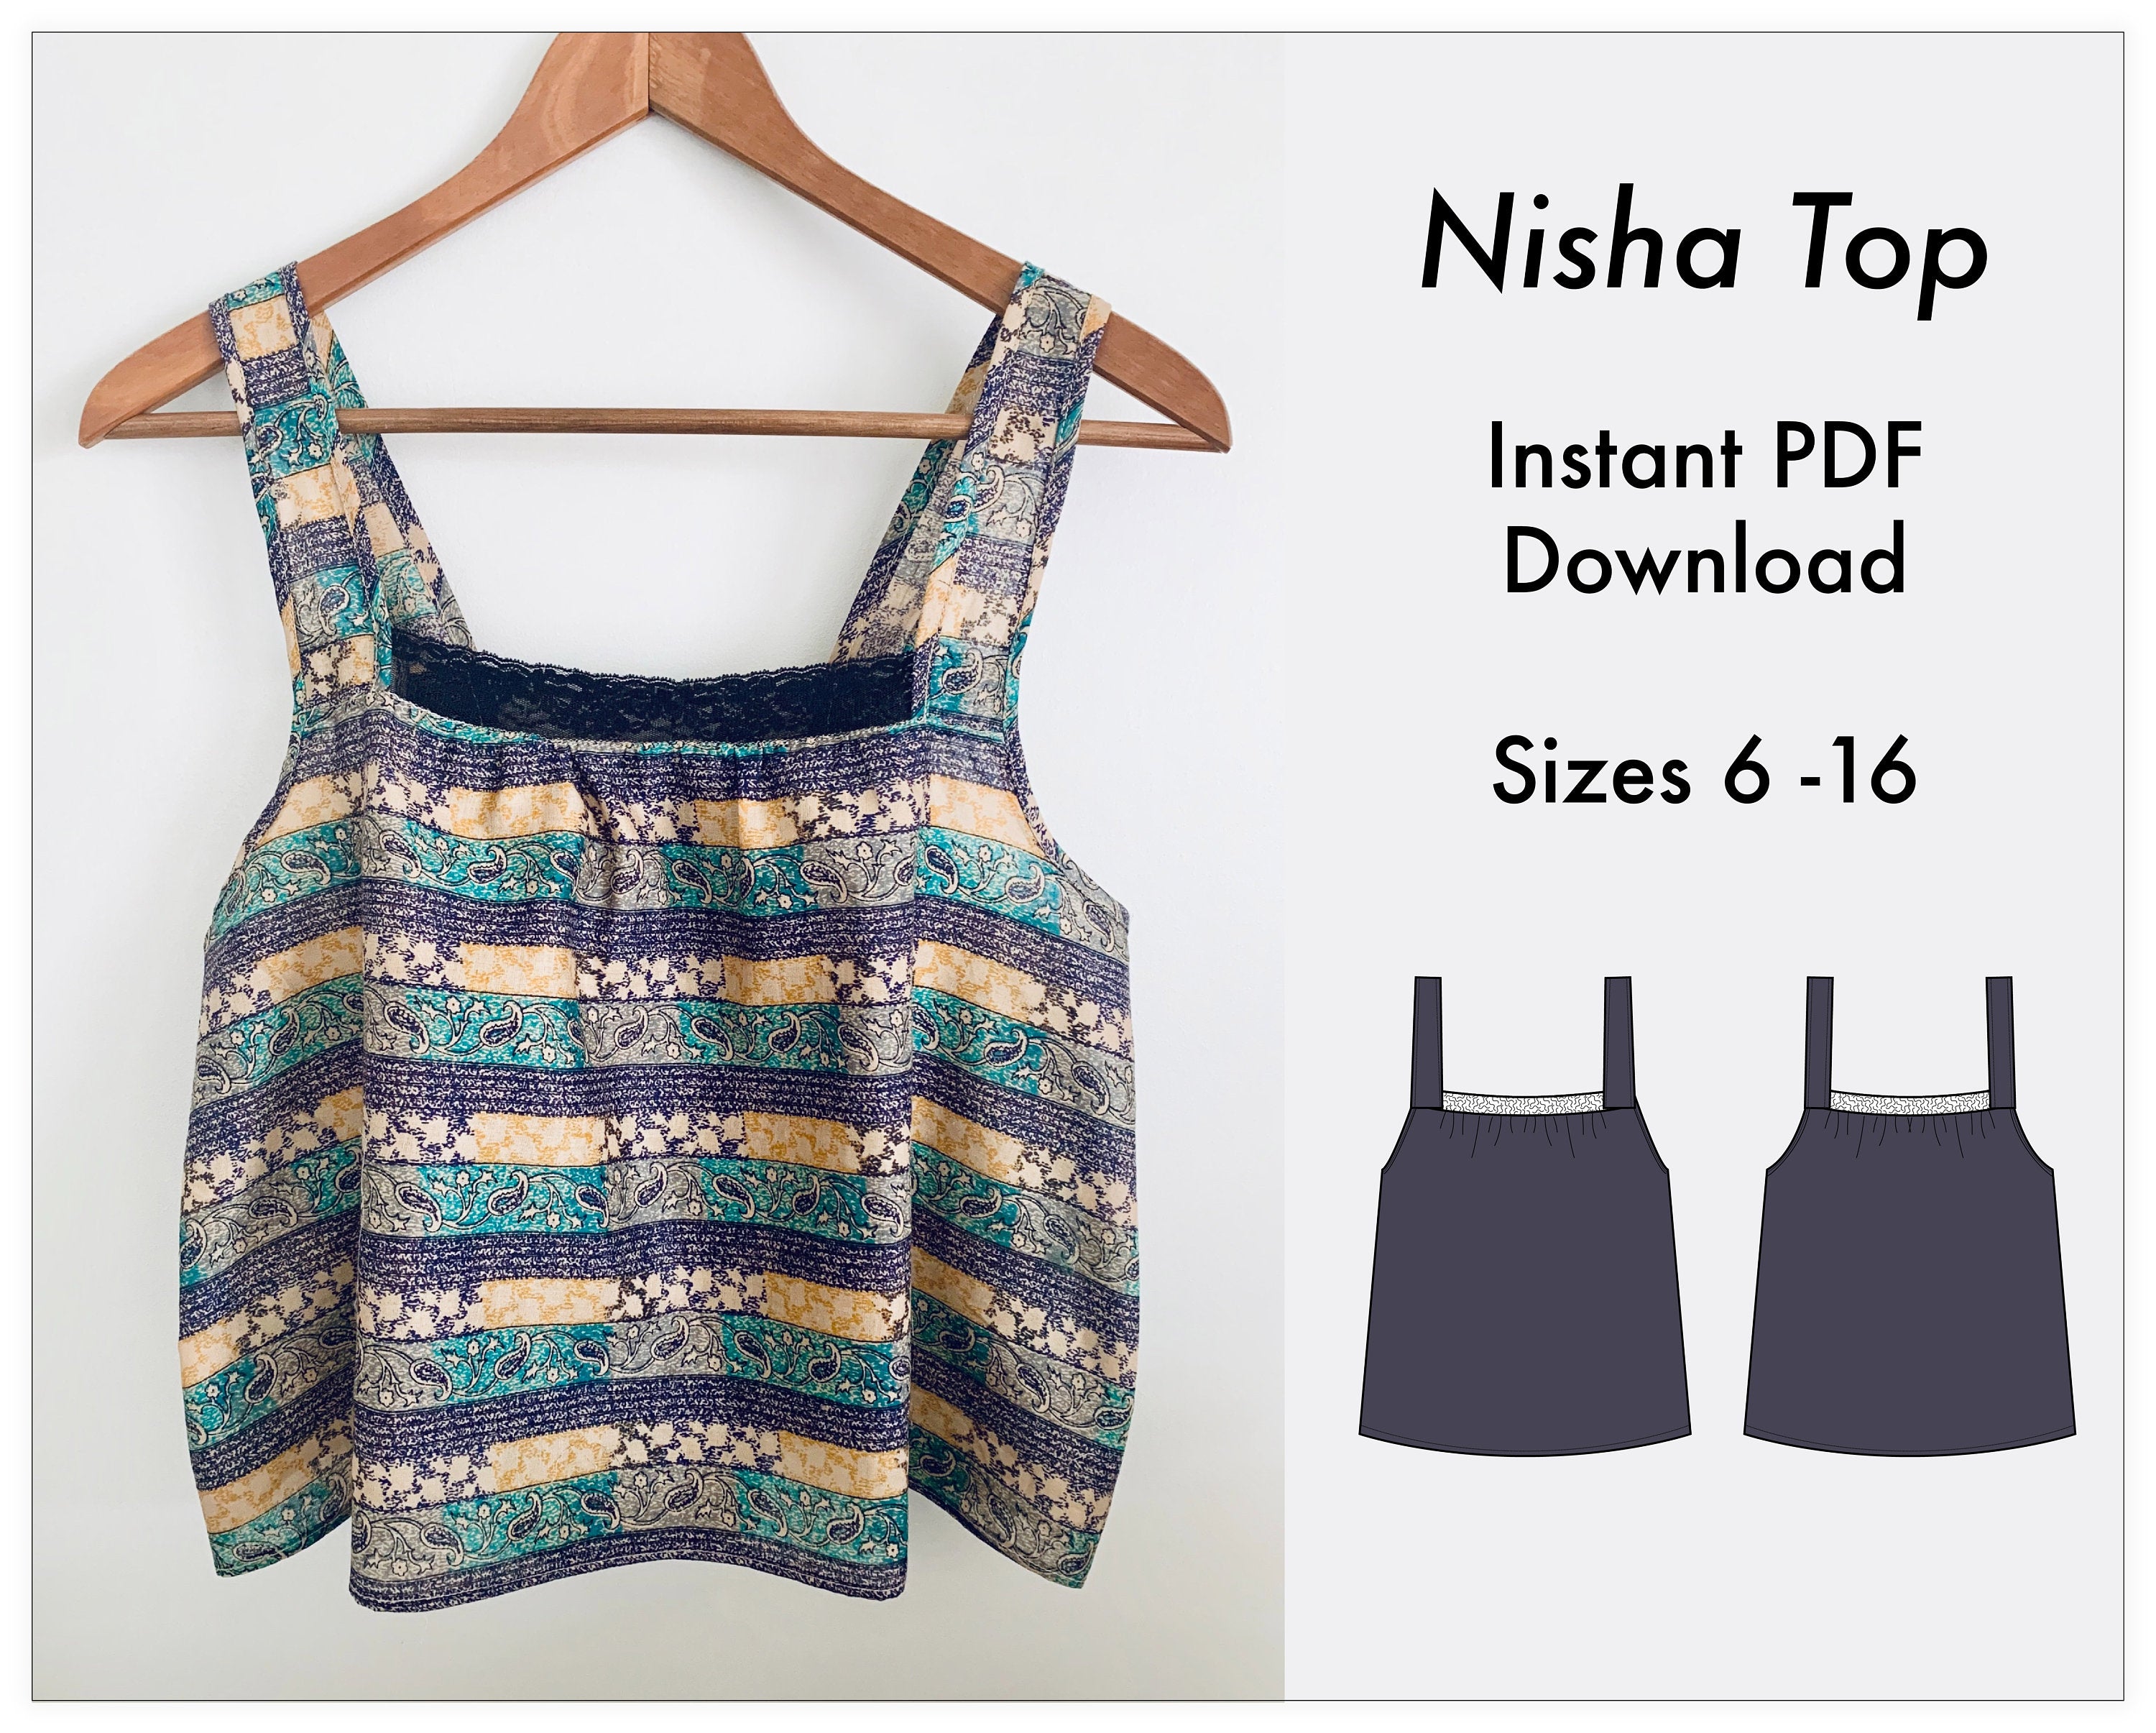 Woven top pattern, Lace camisole top